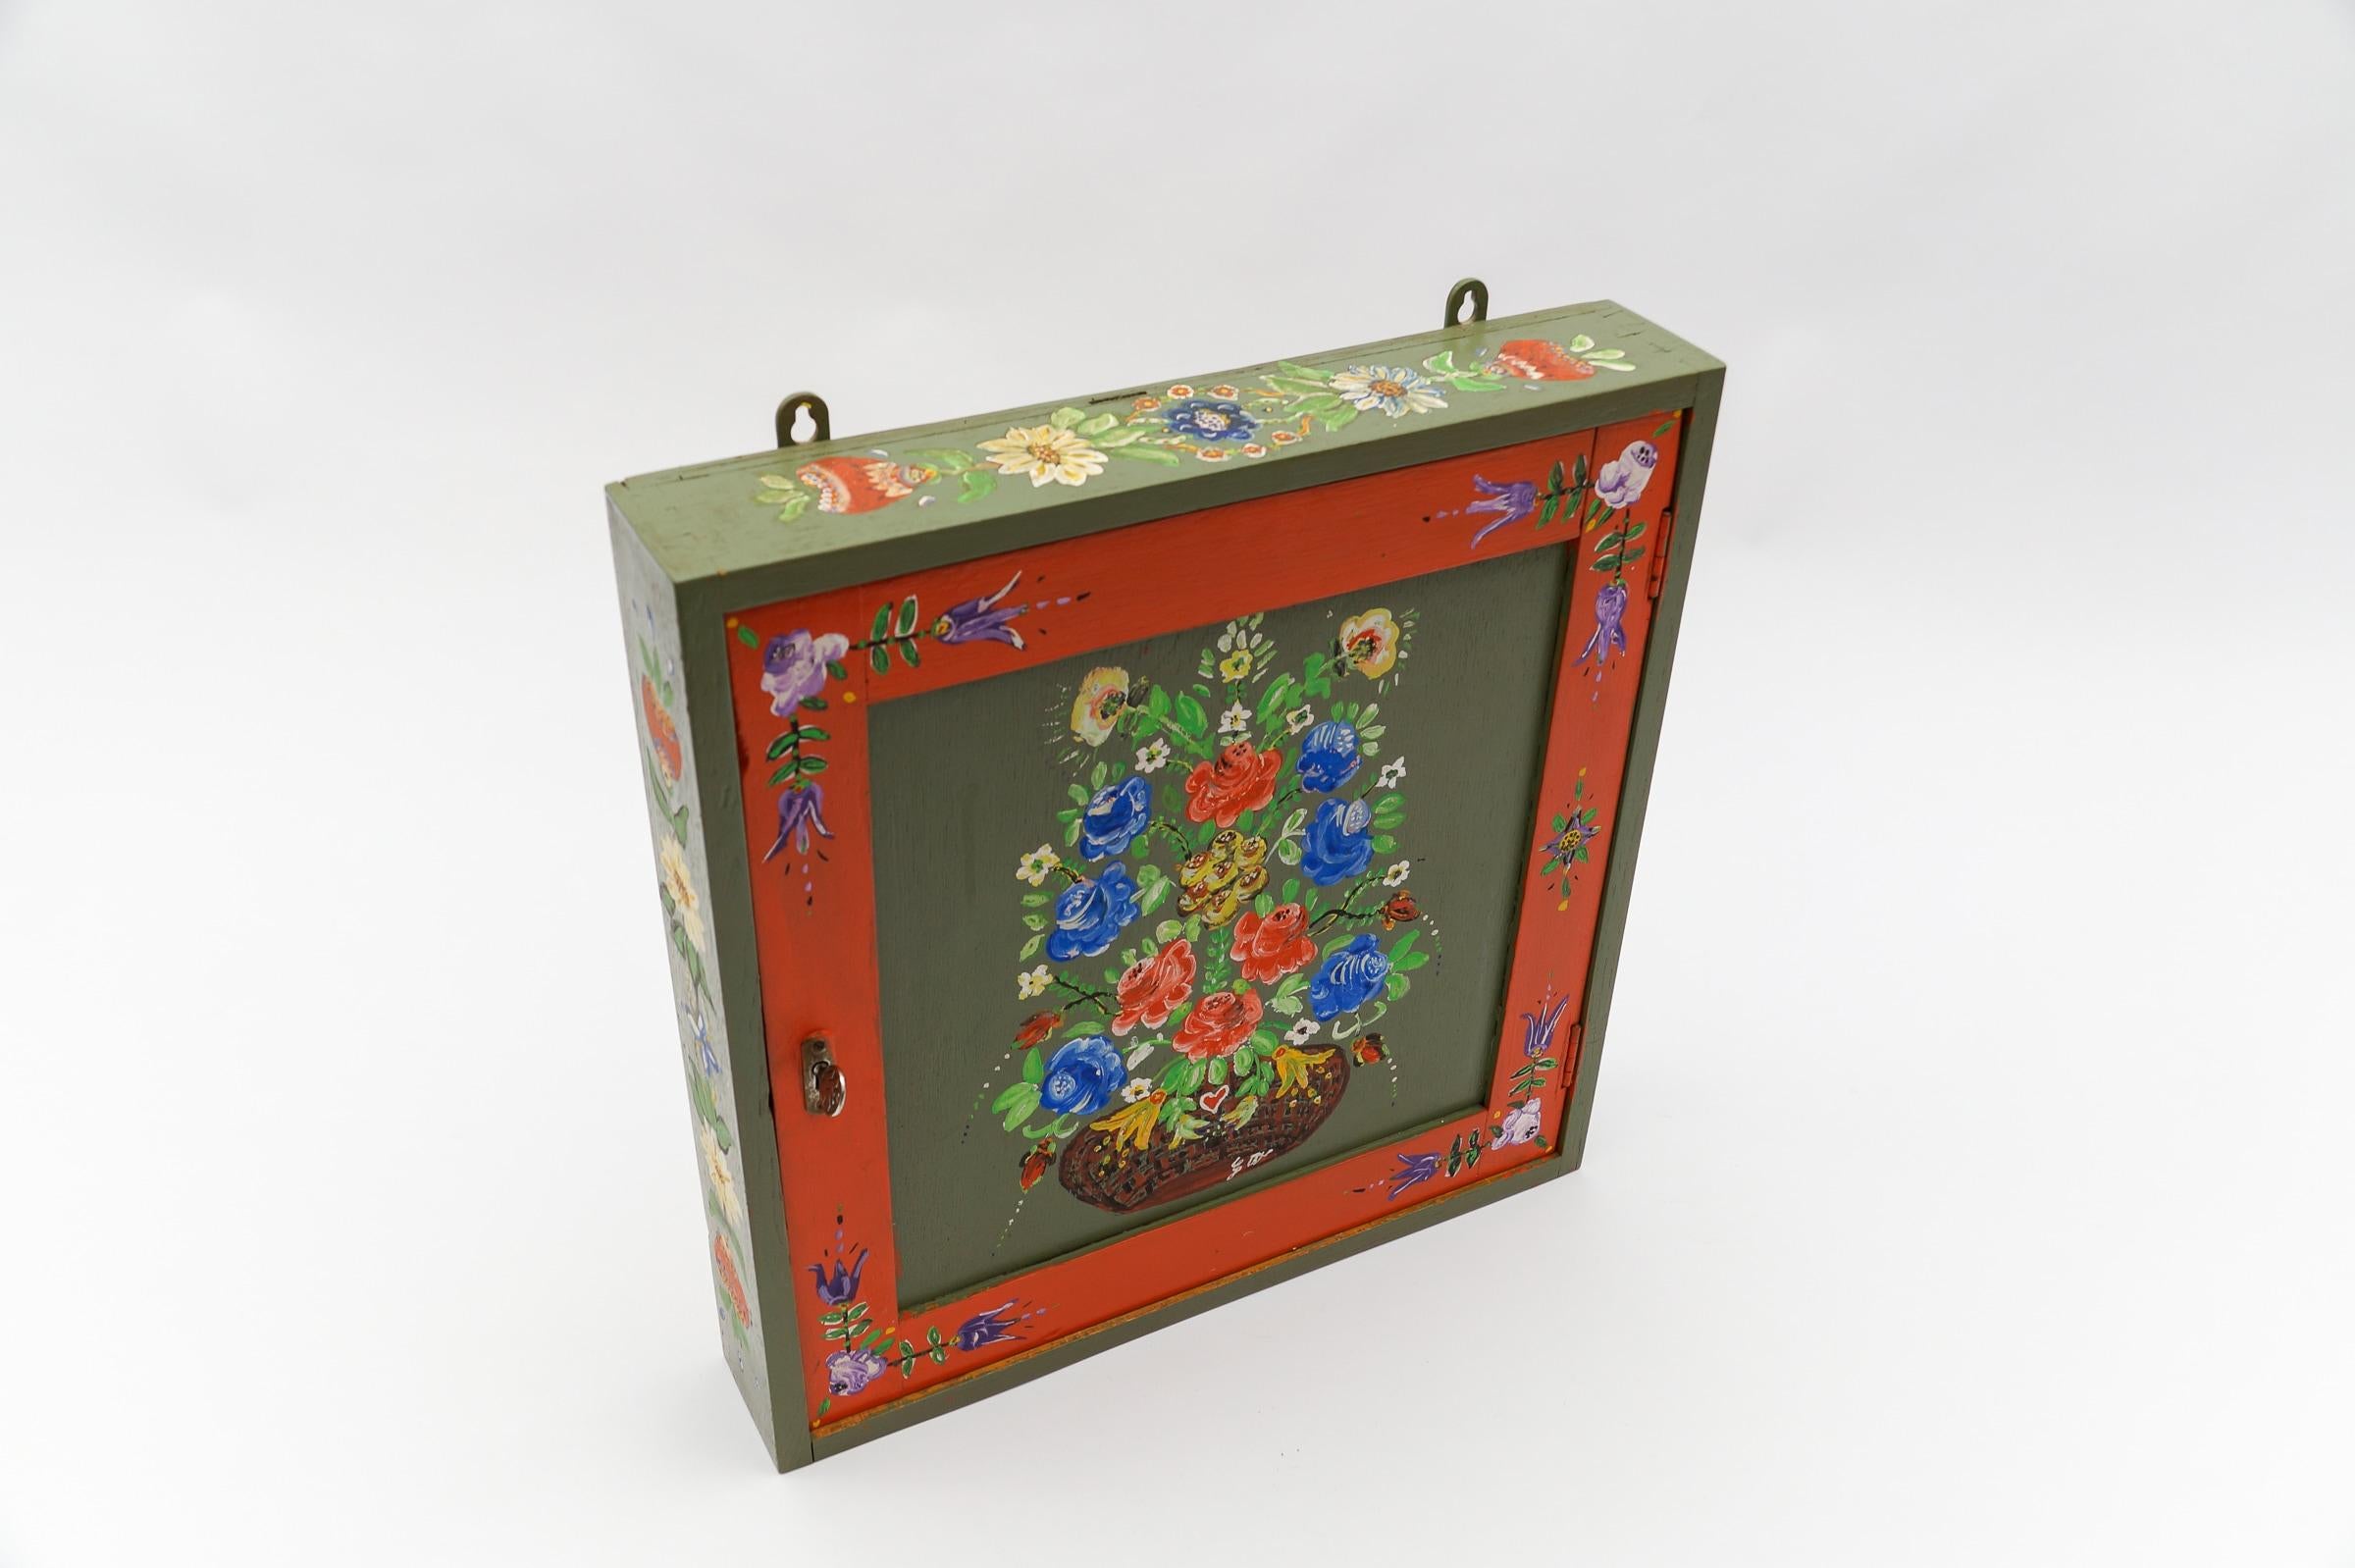 Hand-painted with the typical Black Forest patterns and flowers.

Ideal for a hotel, motel or guesthouse.

Space for 50 keys.